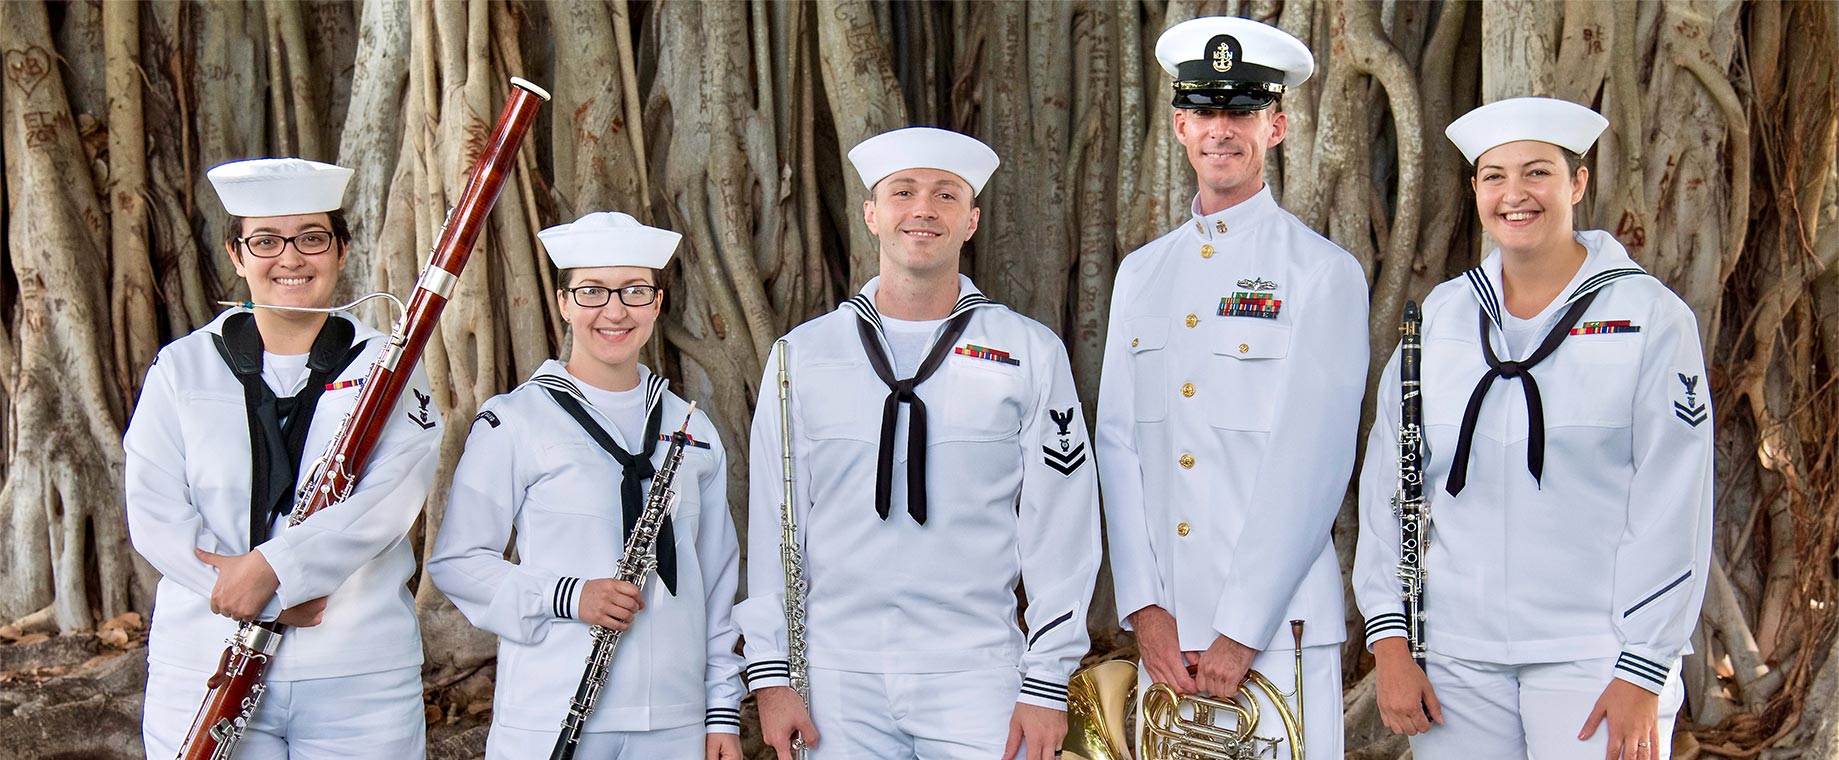 Five Sailors smile at the camera while holding their instruments: a bassoon, oboe, flute, french horn and clarinet.